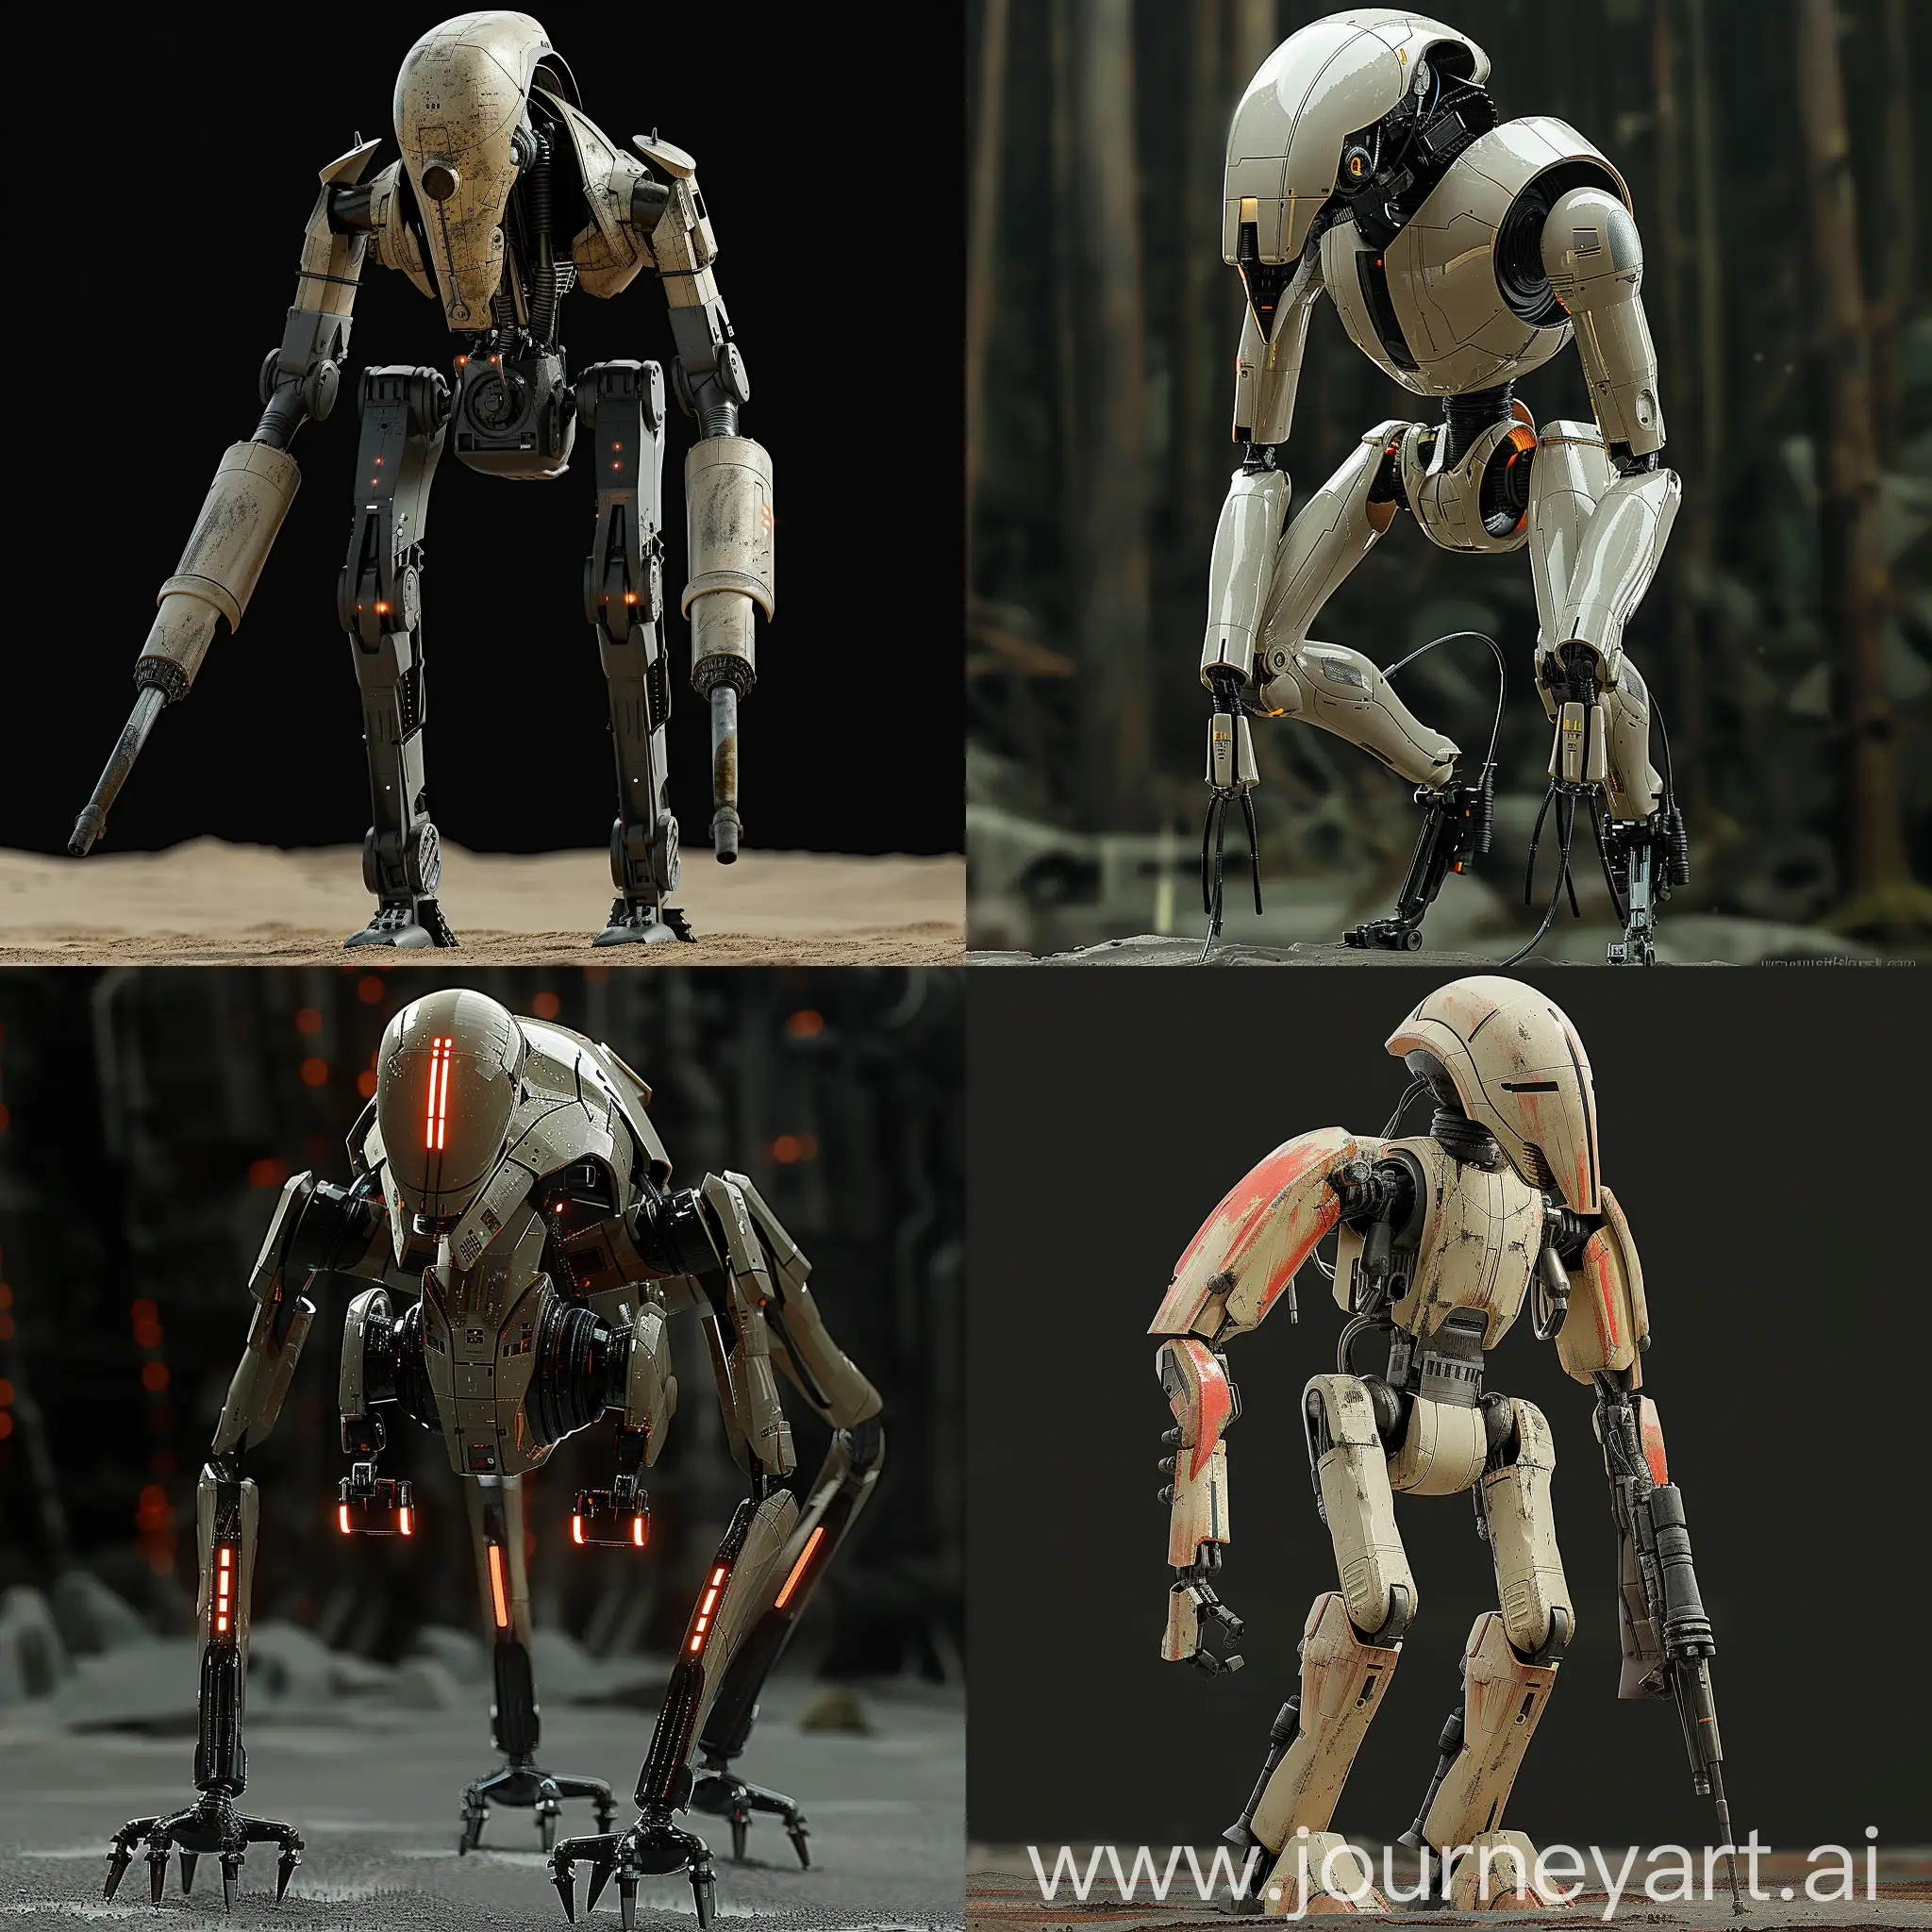 Futuristic-B1series-Battle-Droid-with-Nanotech-Upgrades-and-Solar-Panels